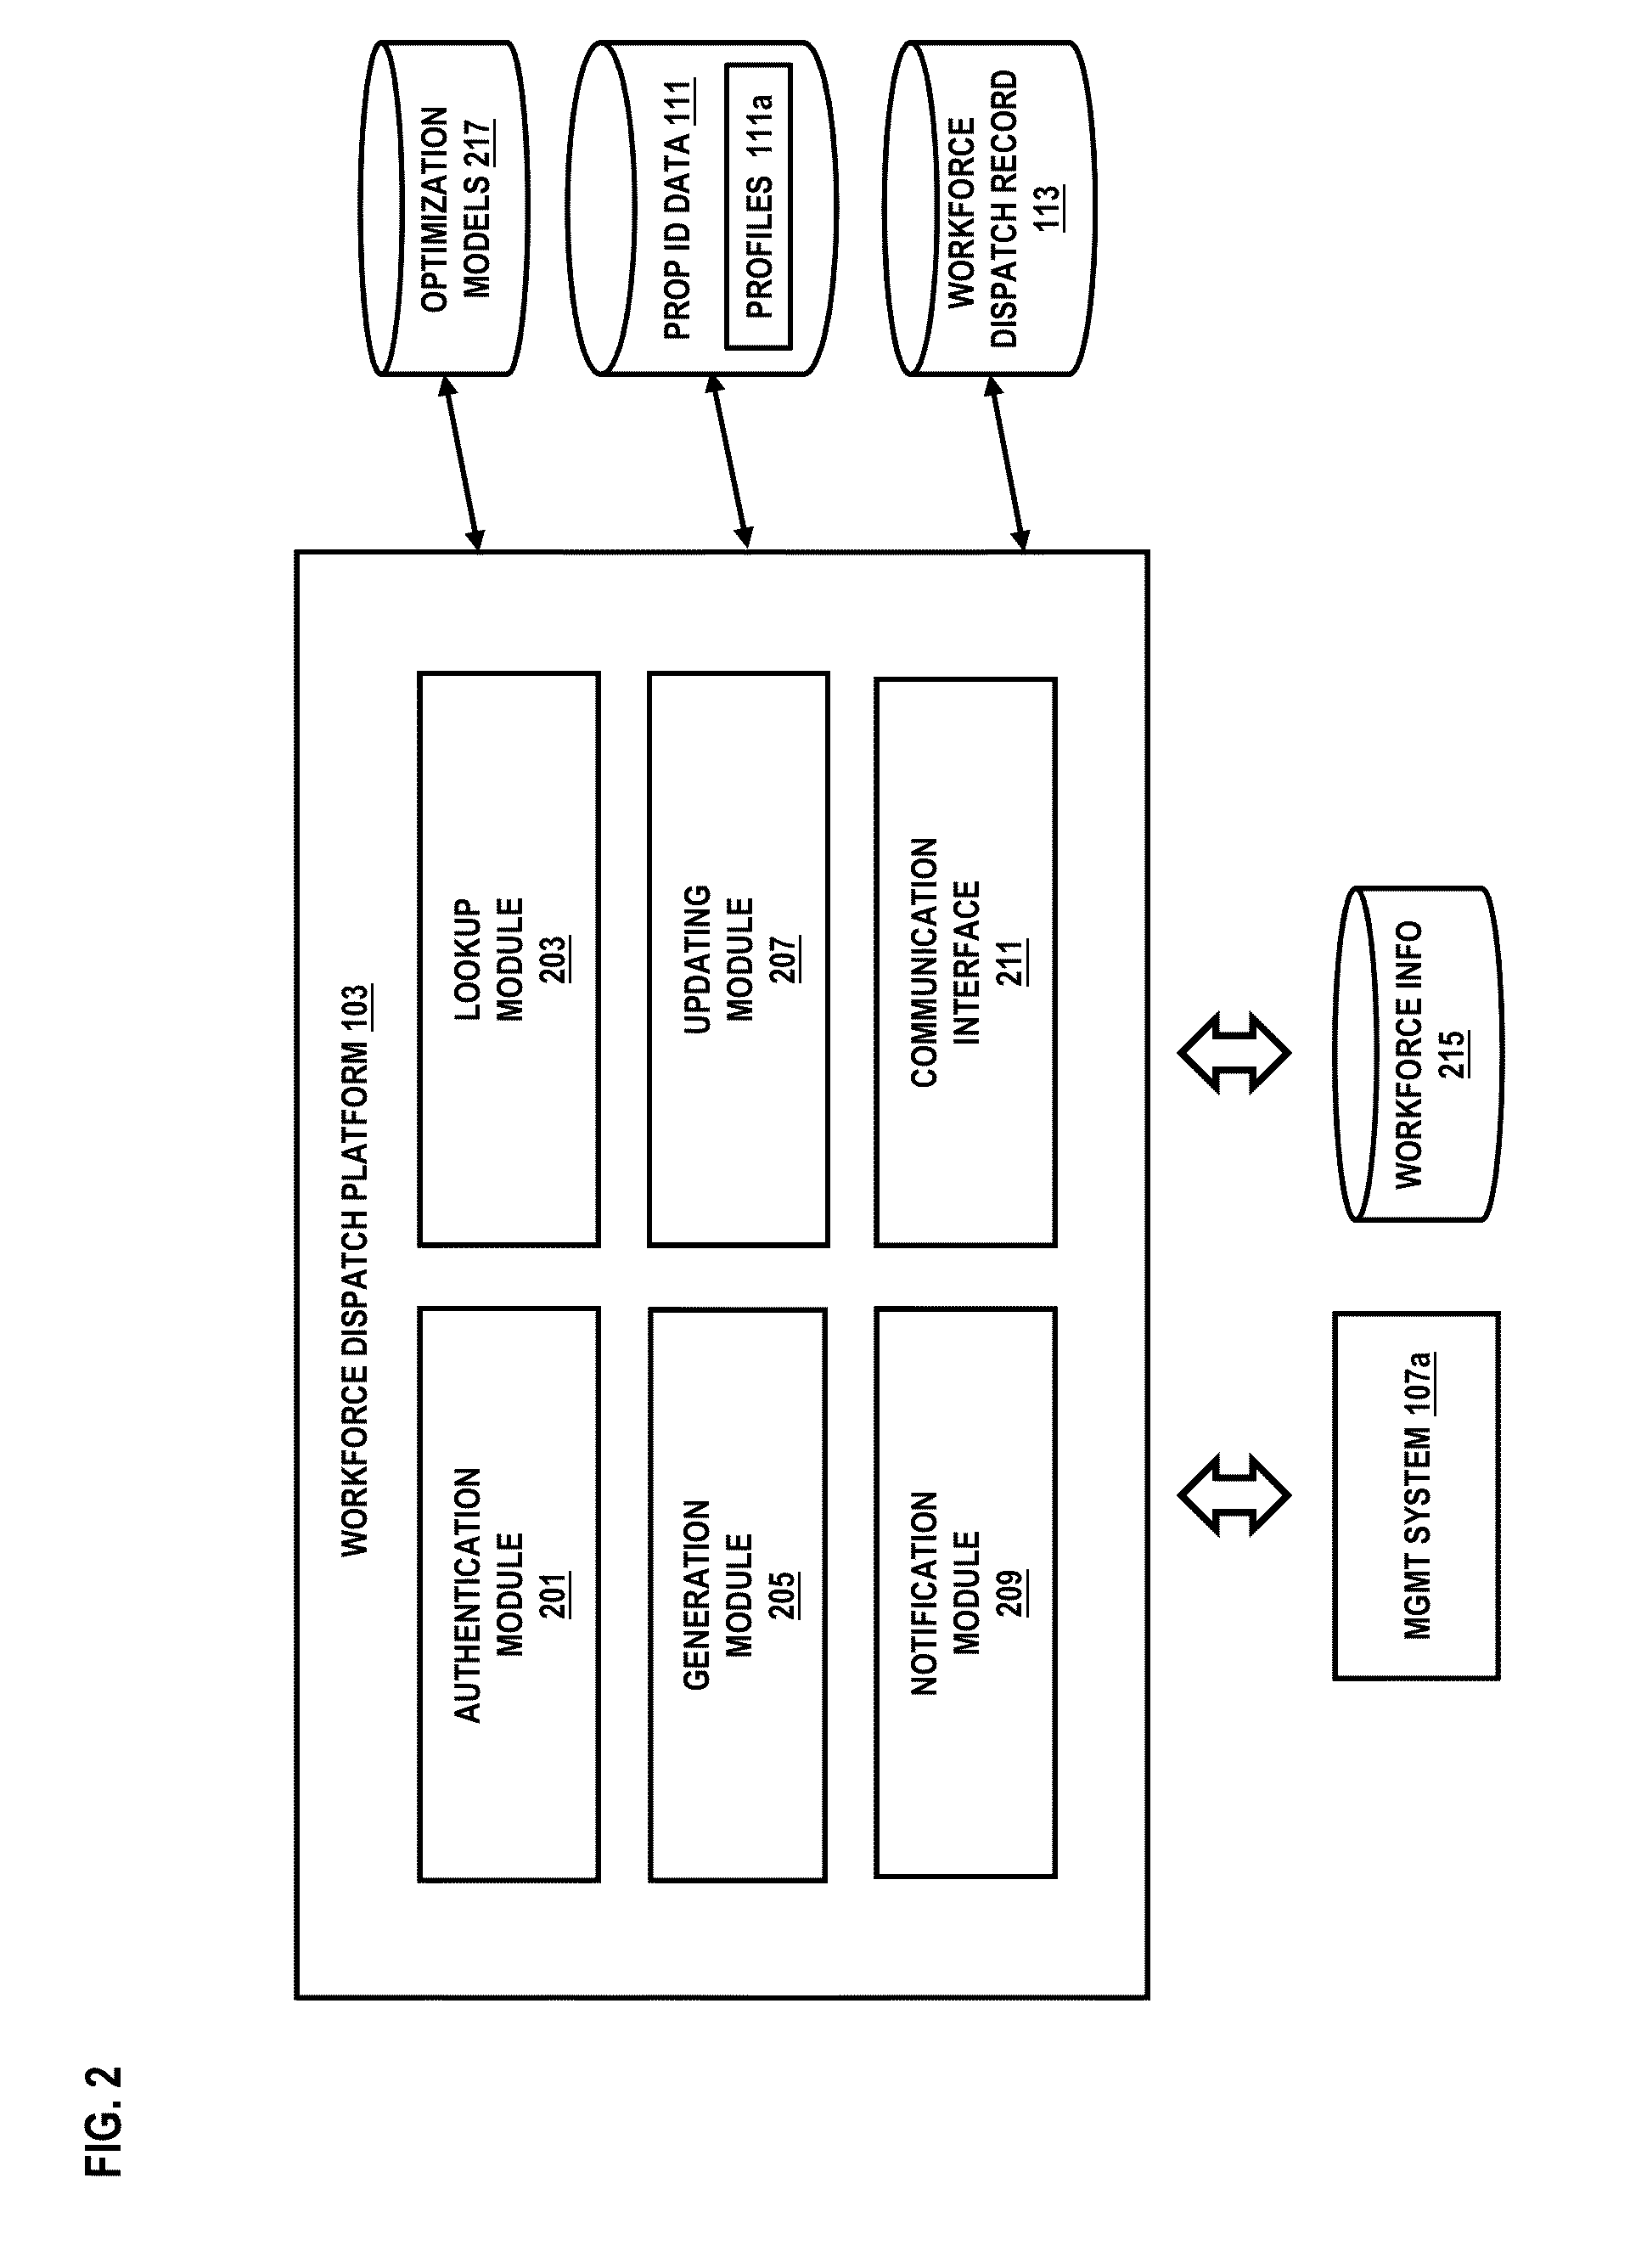 Method and system for optimizing dispatch workflow information